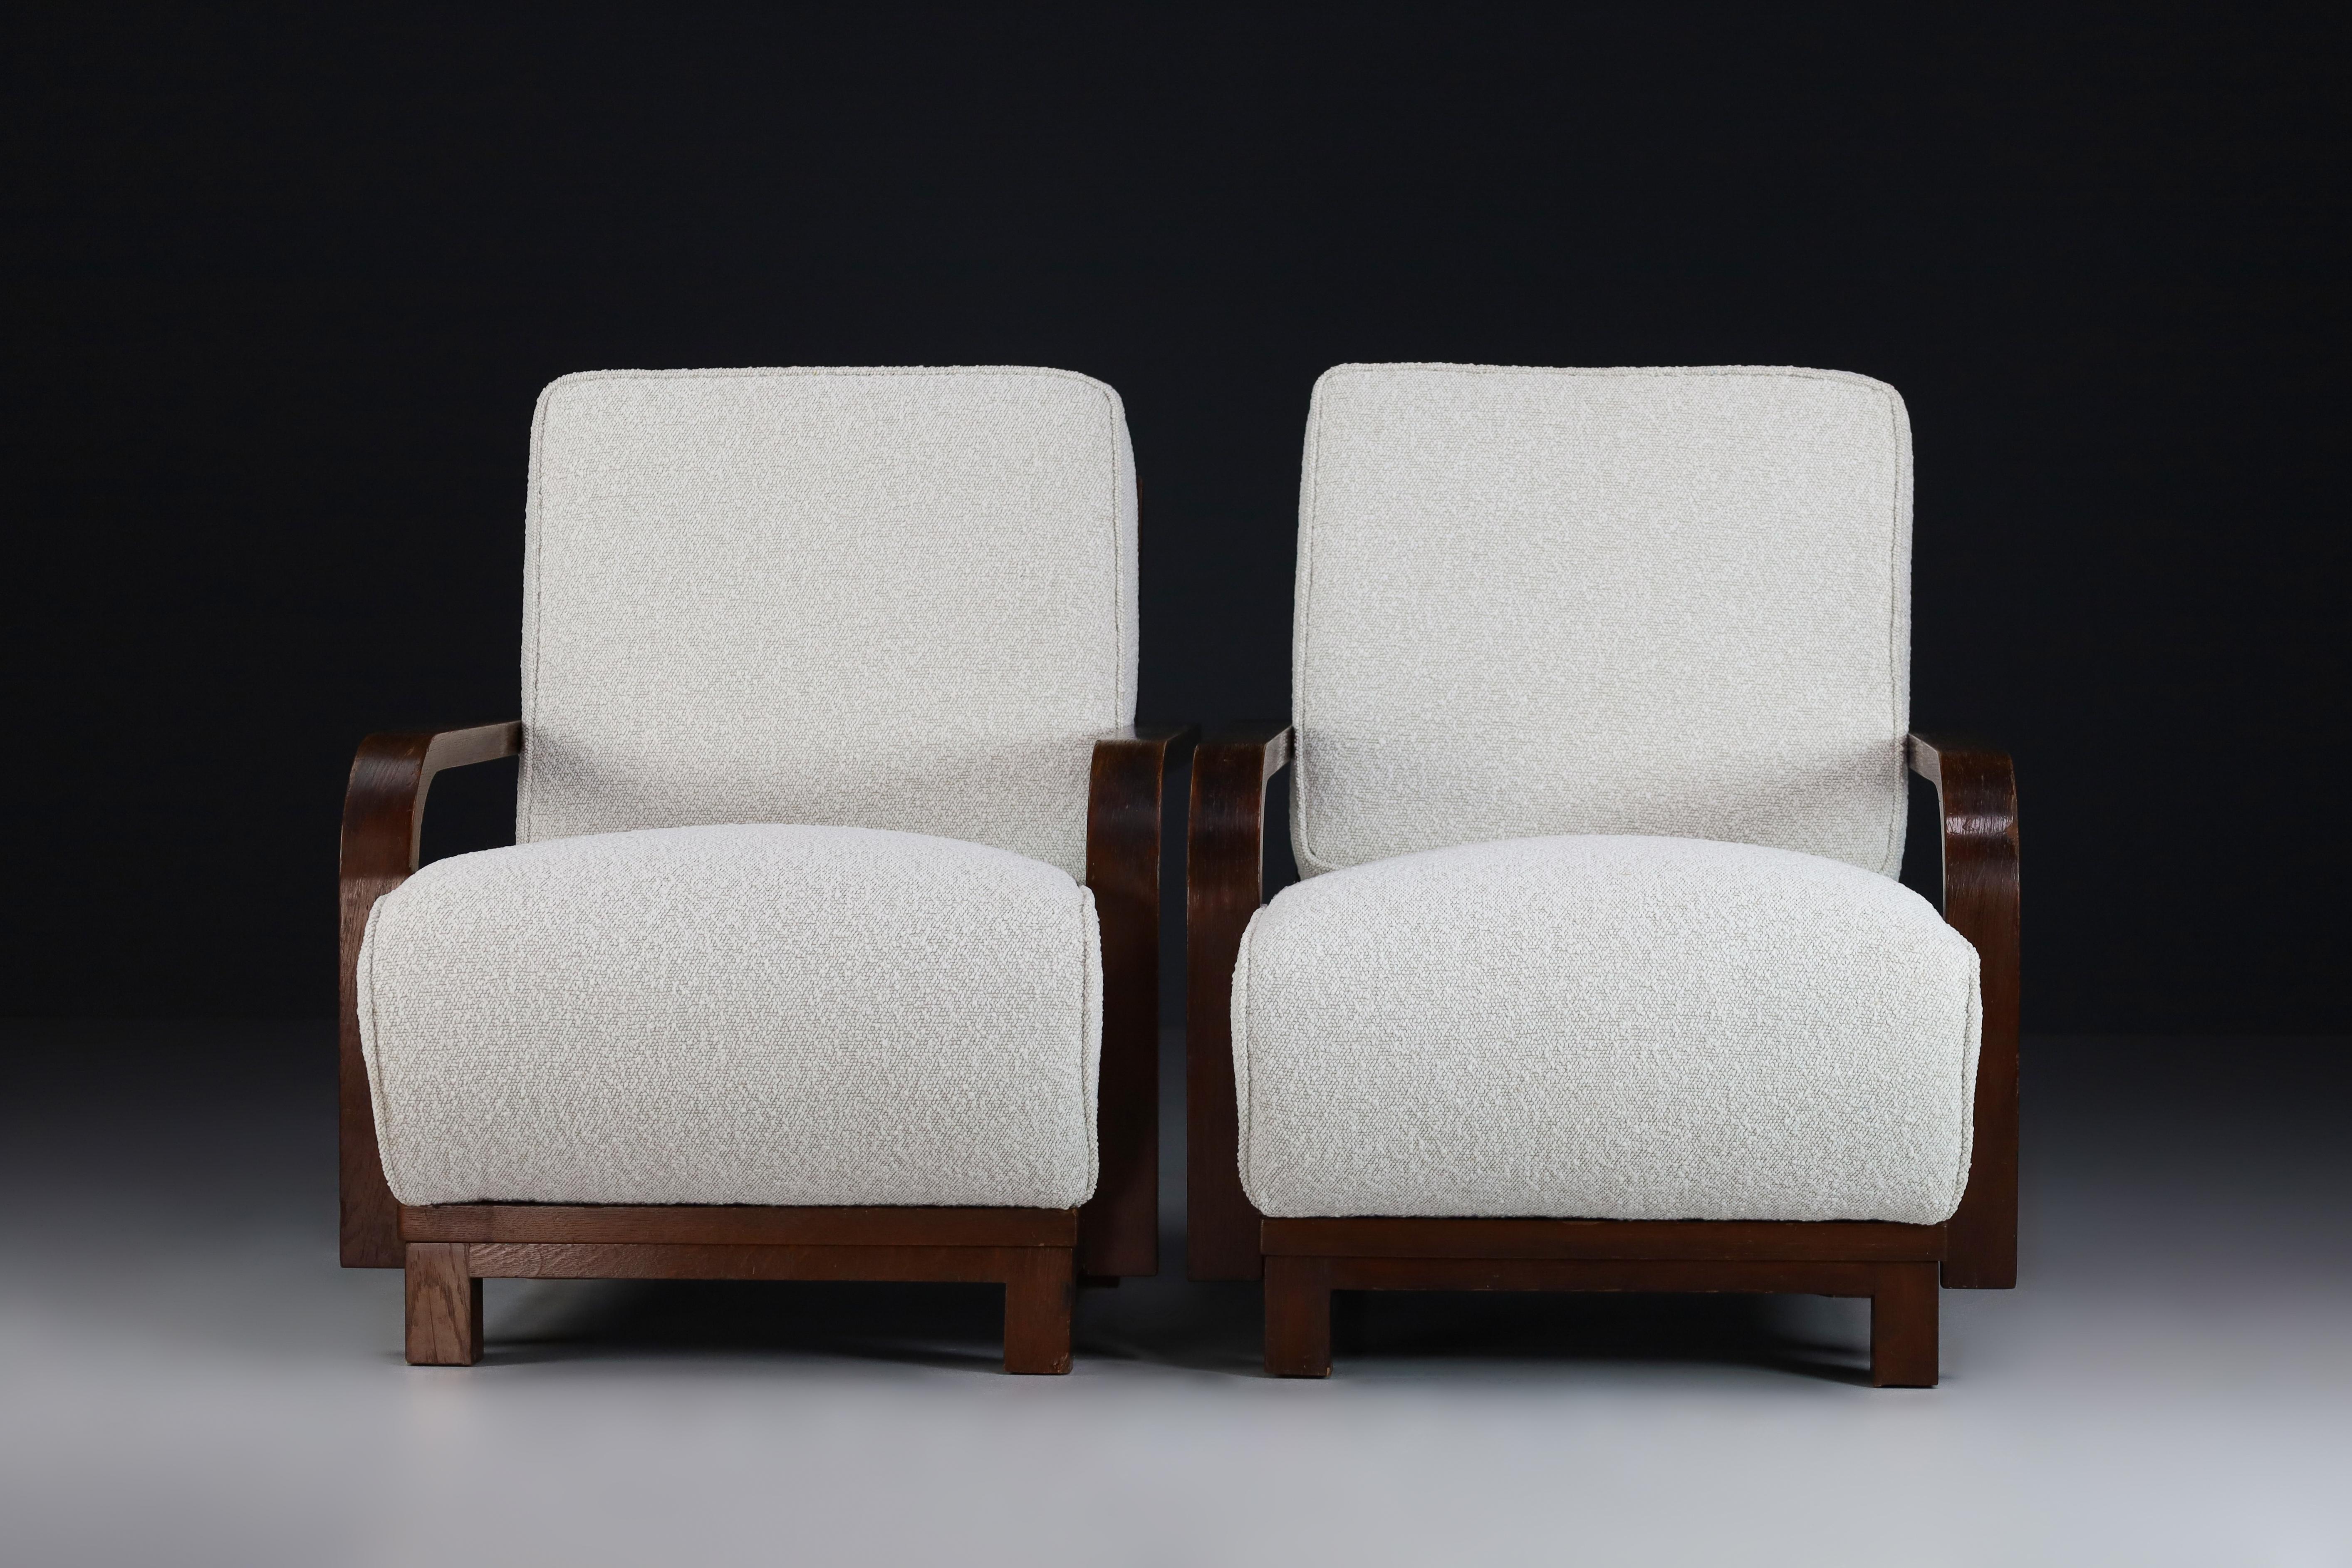 20th Century Art Deco Armchairs in Bentwood and Bouclé Upholstery, Prague, the 1930s